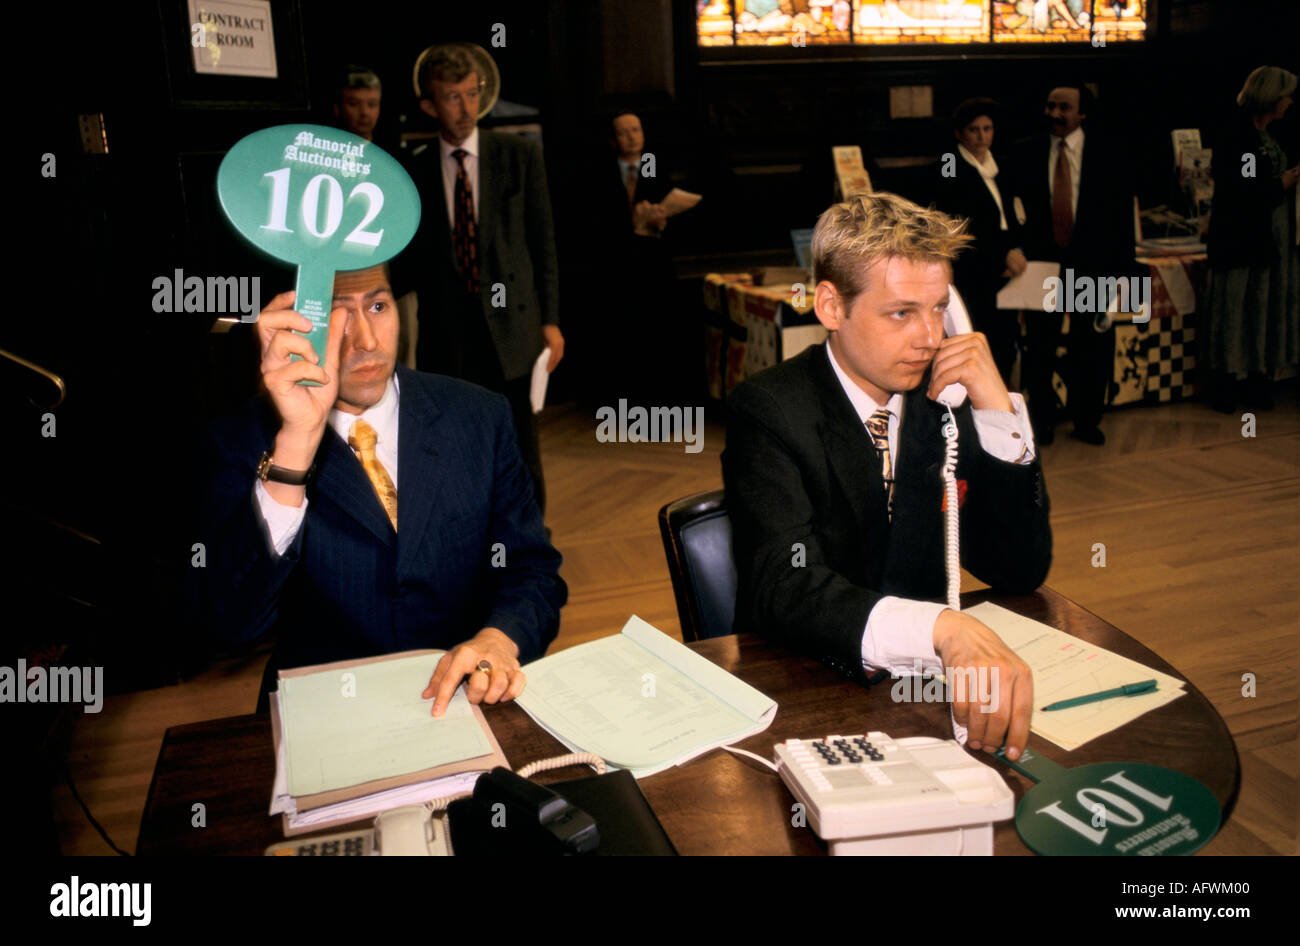 Auction room 1990s man taking a telephone bid over the phone from a client holding up an auction paddle London 90s UK HOMER SYKES Stock Photo